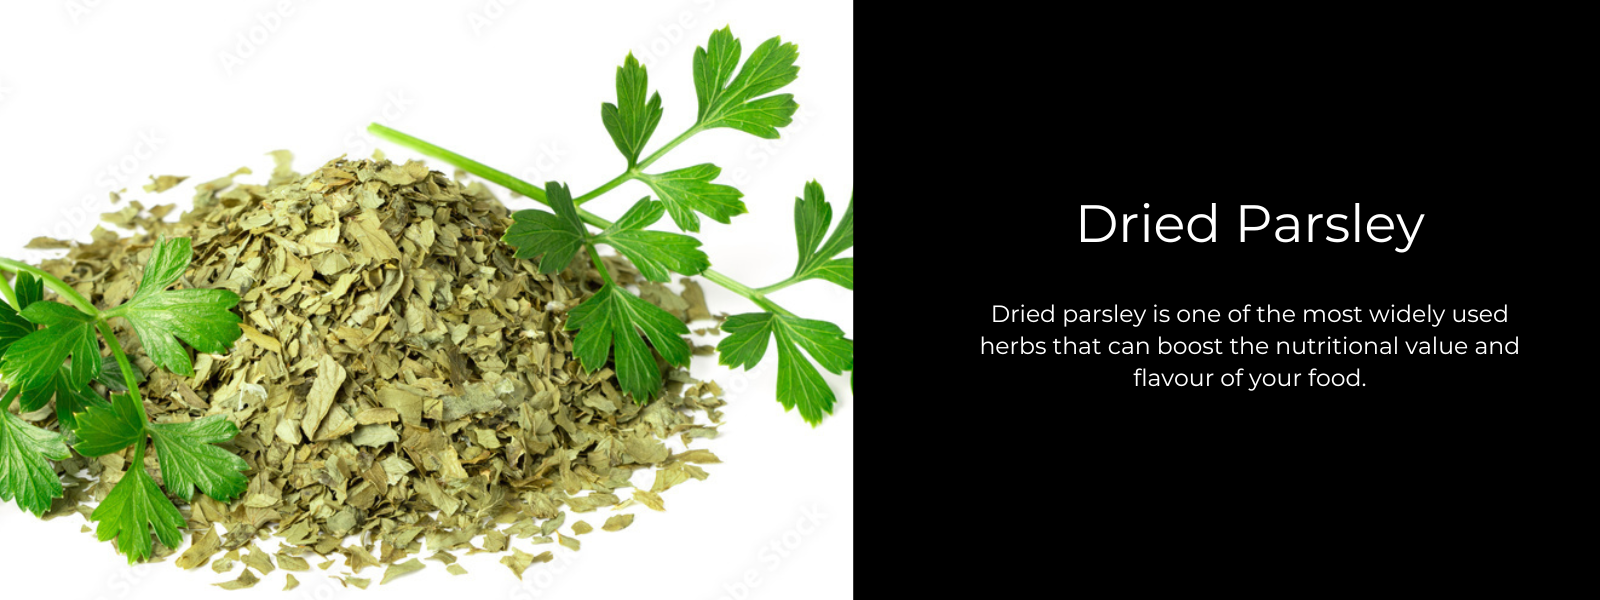 Dried Parsley - Health Benefits, Uses and Important Facts